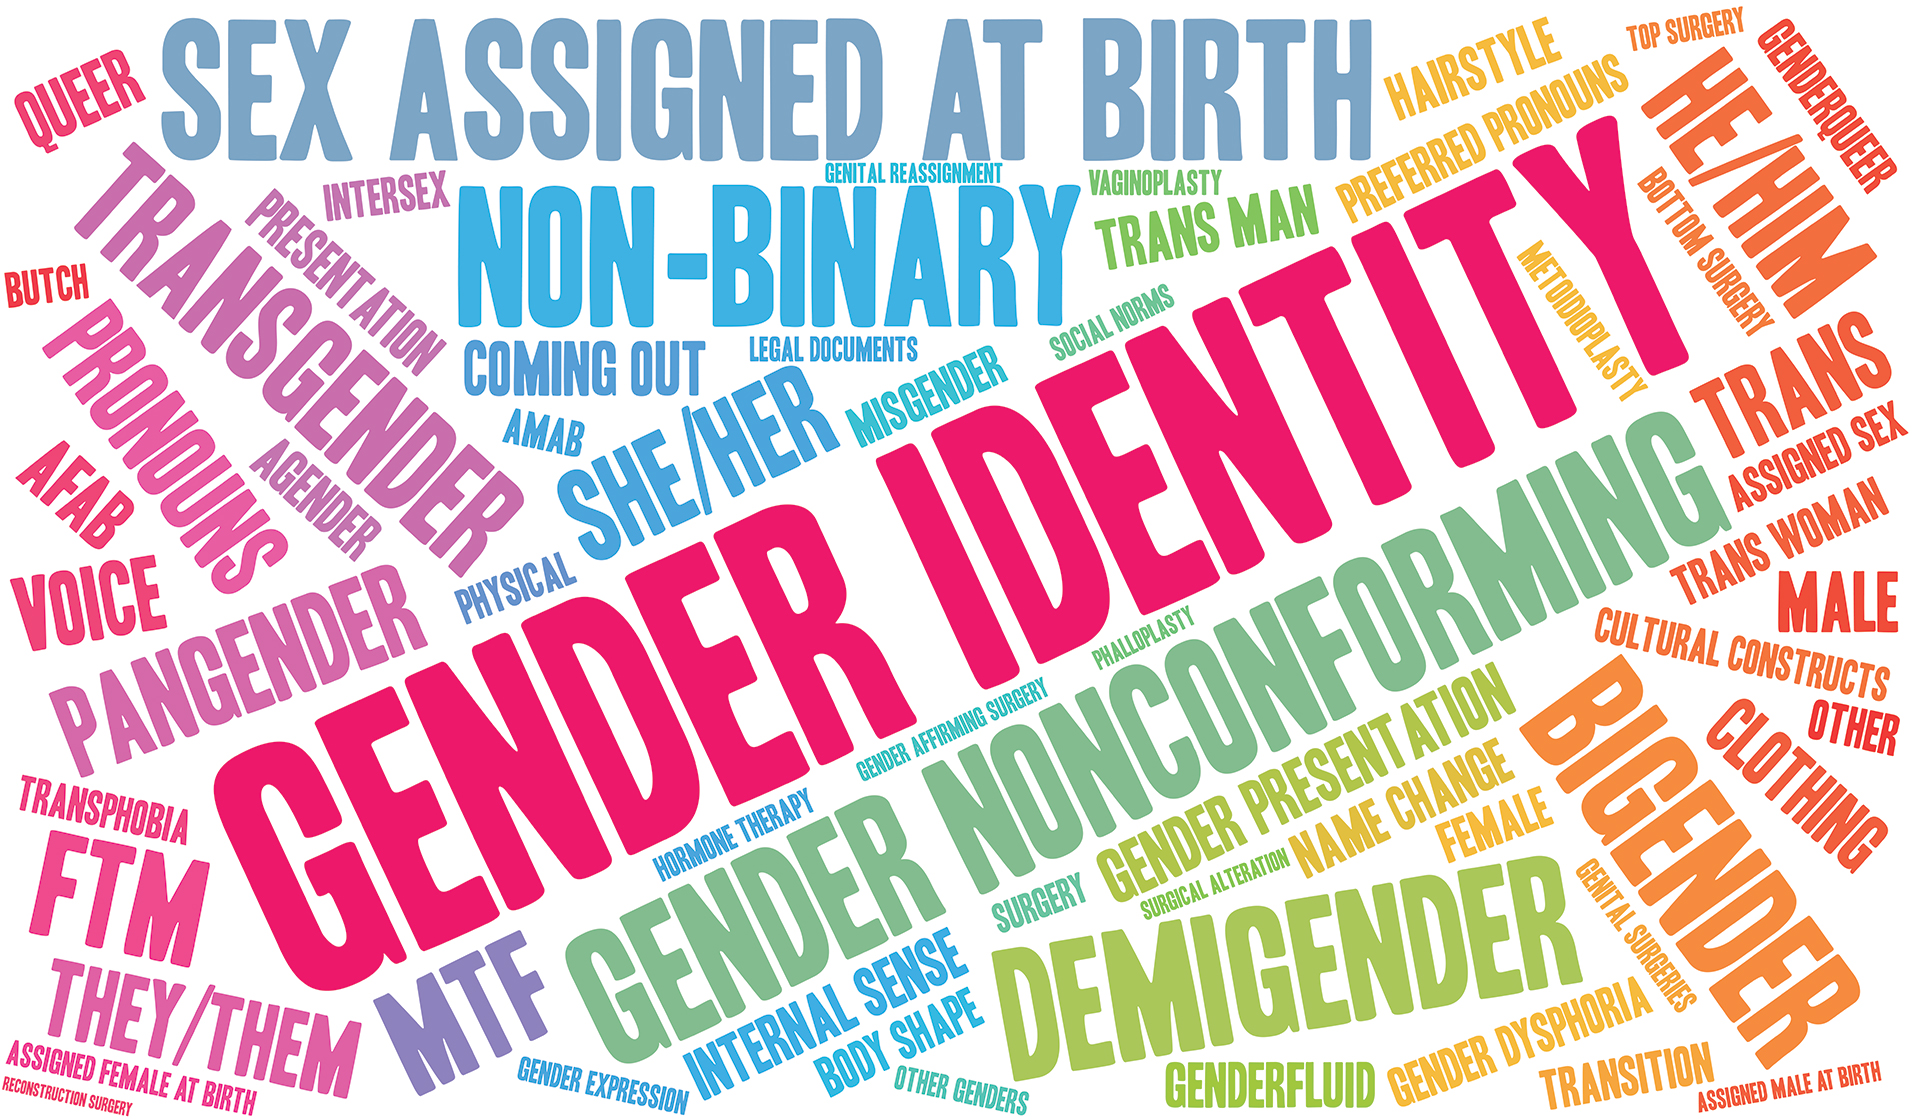 research topics related to gender identity